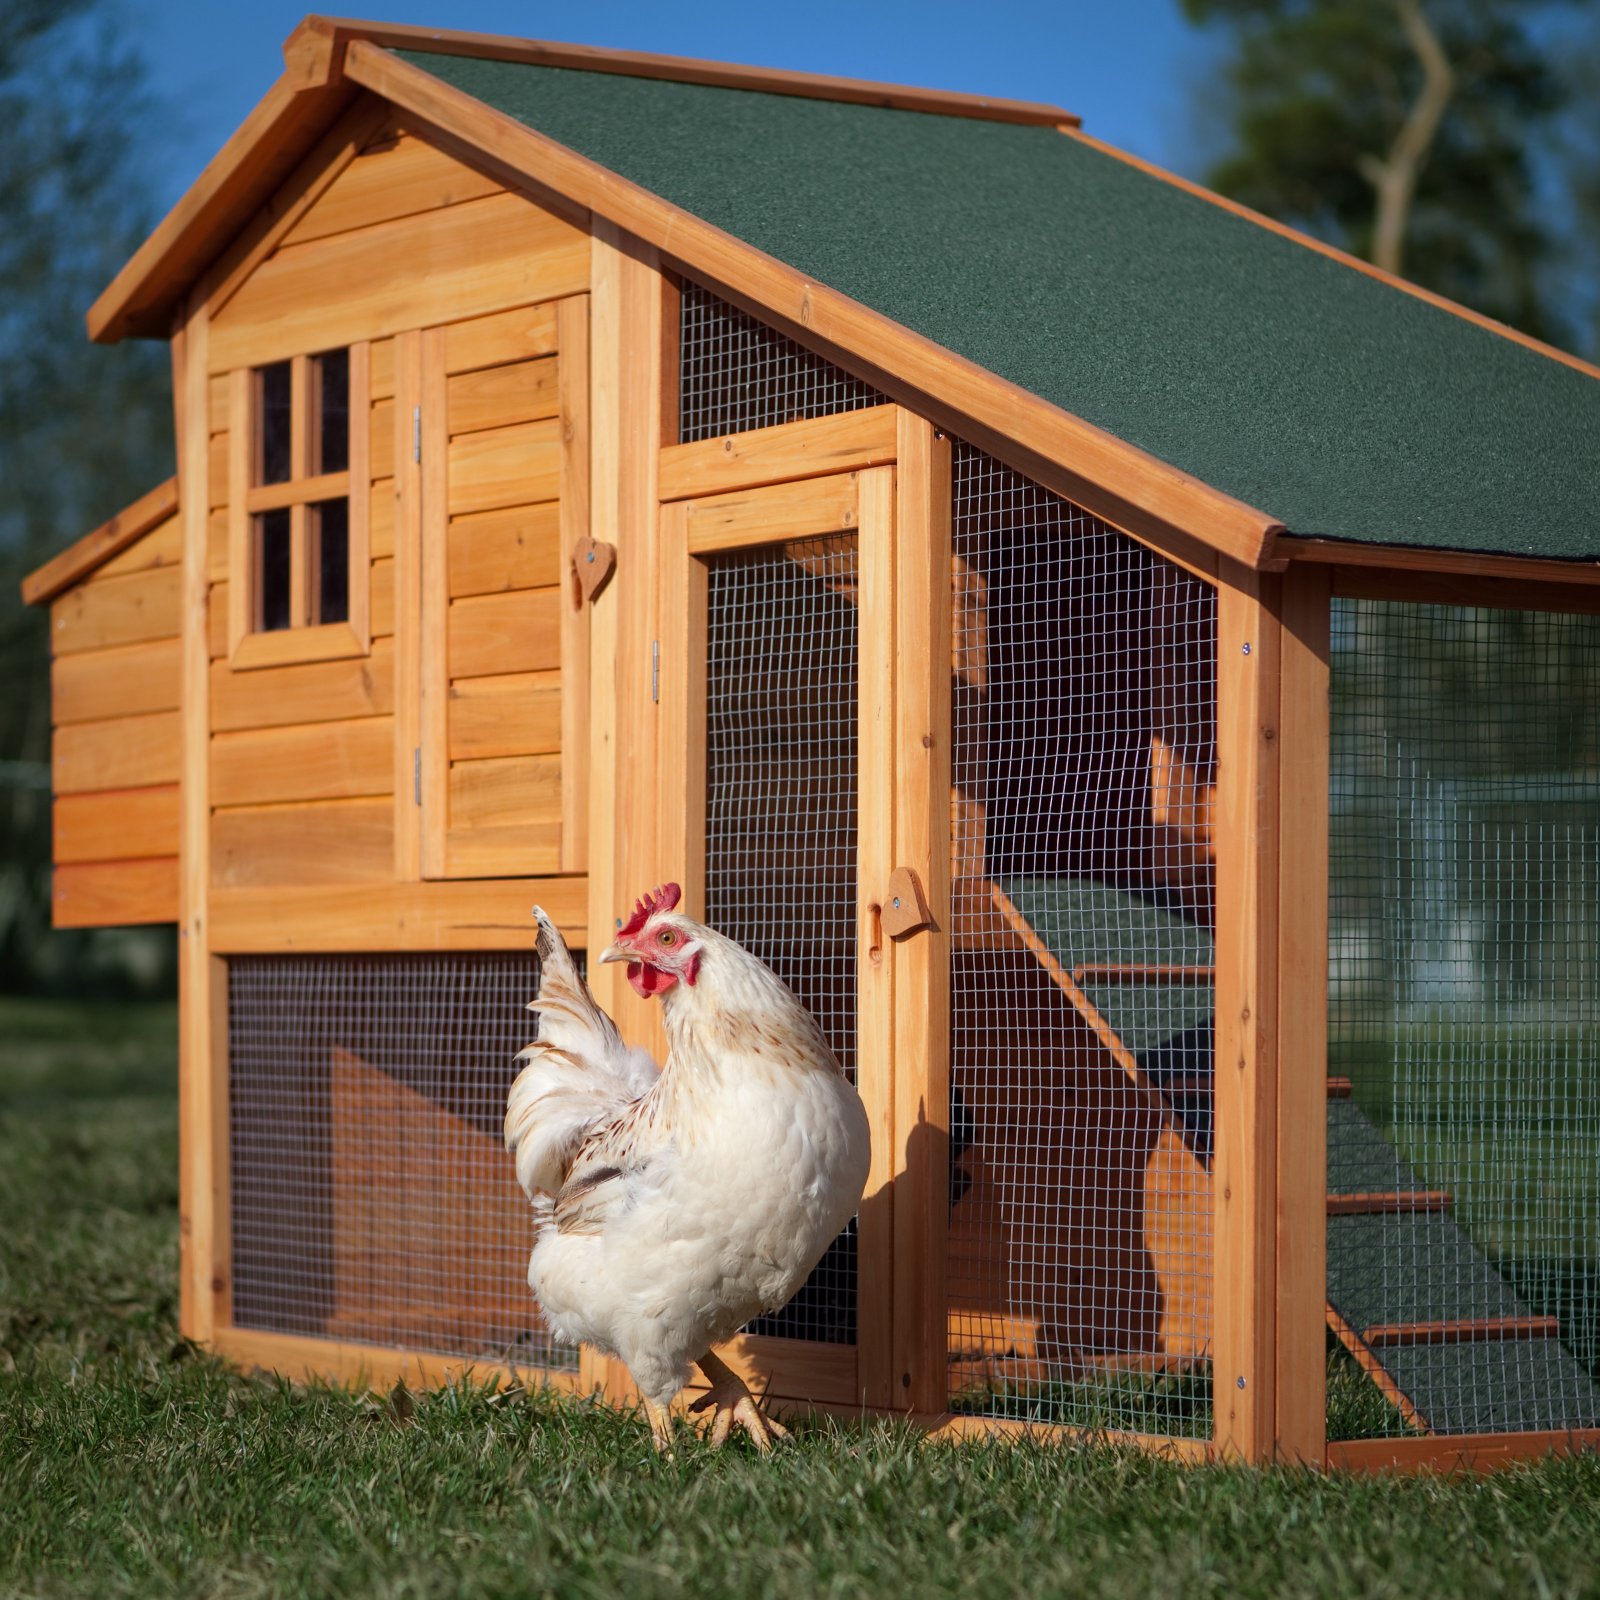 Chicken Coops To Build / Backyard Coops » chicken coops to build